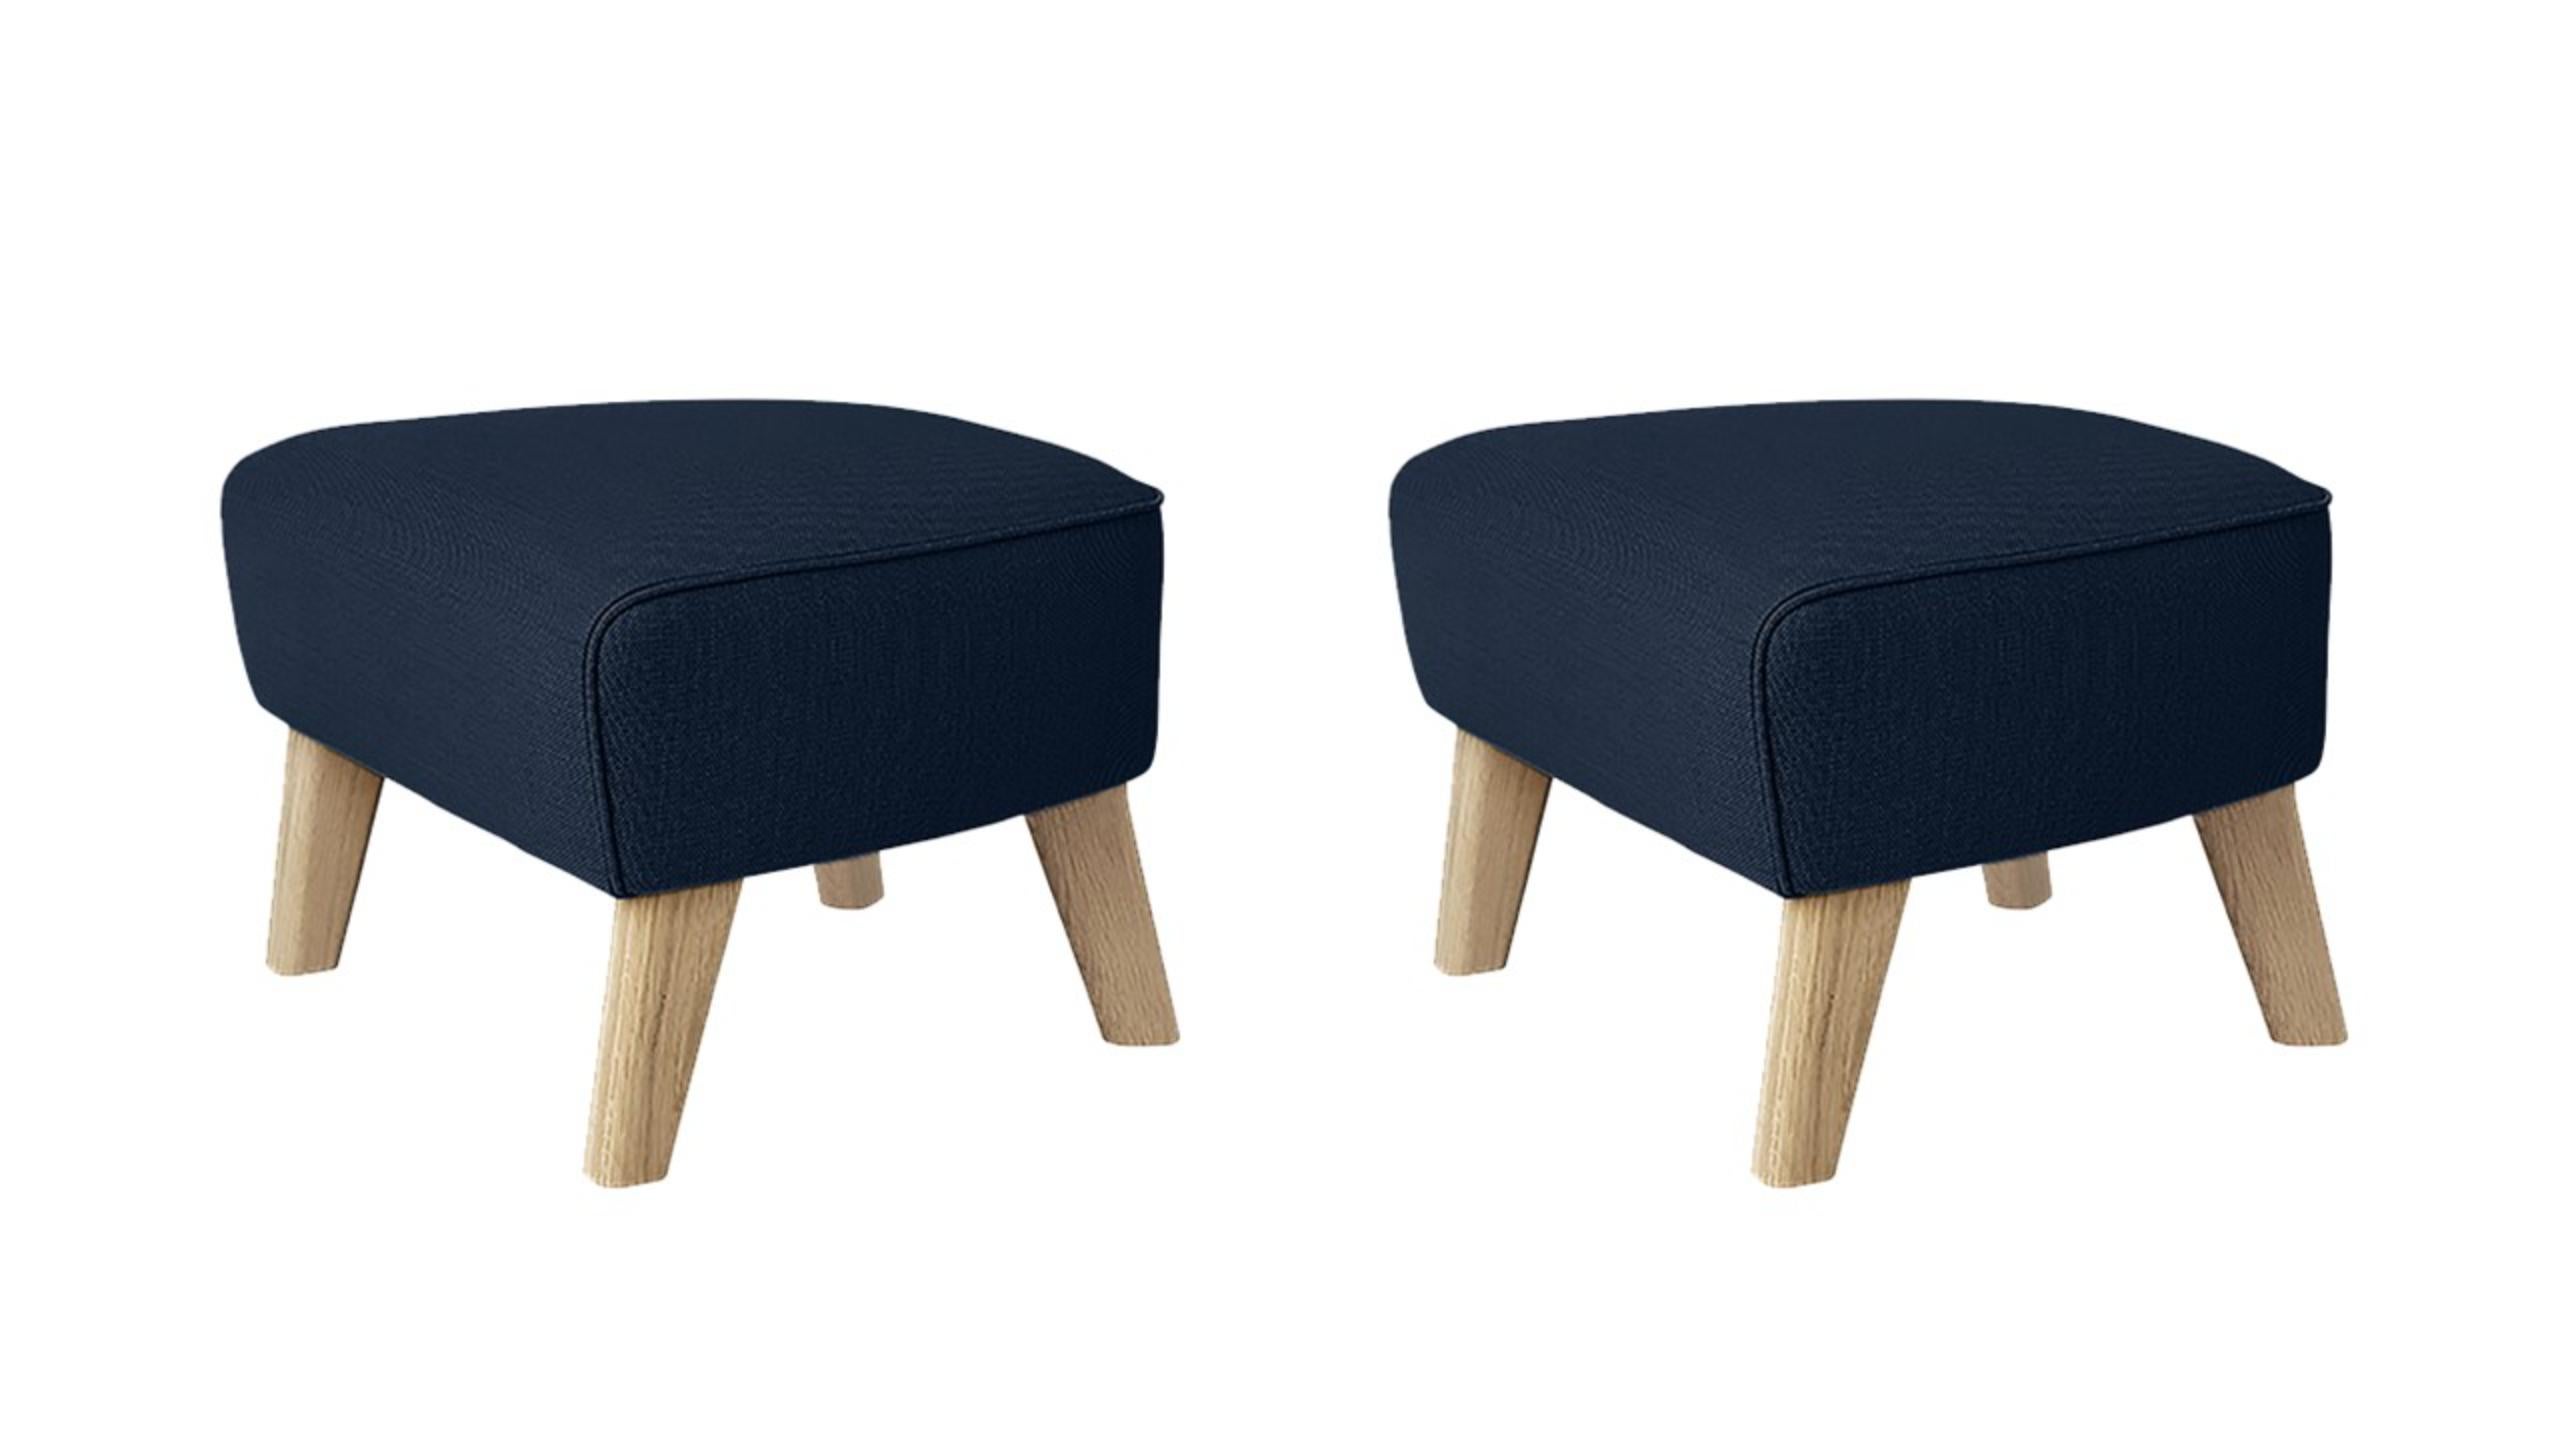 Set of 2 blue and natural oak sahco zero footstool by Lassen
Dimensions: W 56 x D 58 x H 40 cm 
Materials: Textile
Also available: Other colors available.

The my own chair footstool has been designed in the same spirit as Flemming Lassen’s